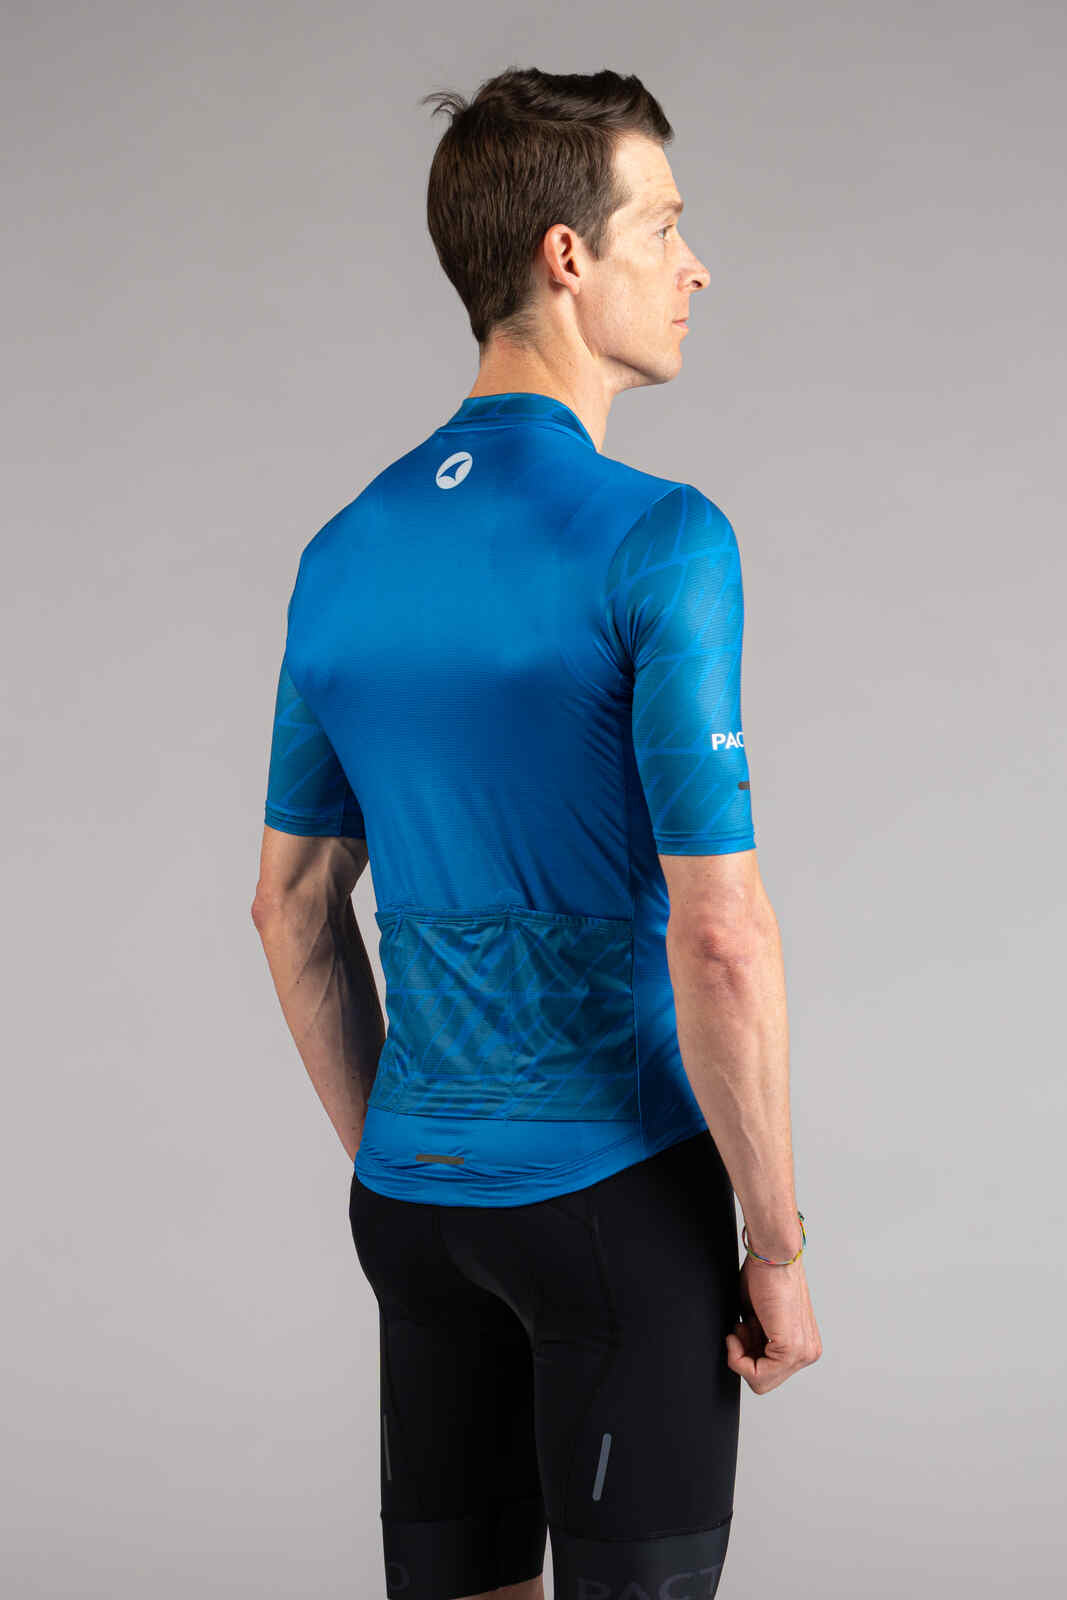 Men's Blue Ascent Aero Cycling Jersey - Back View